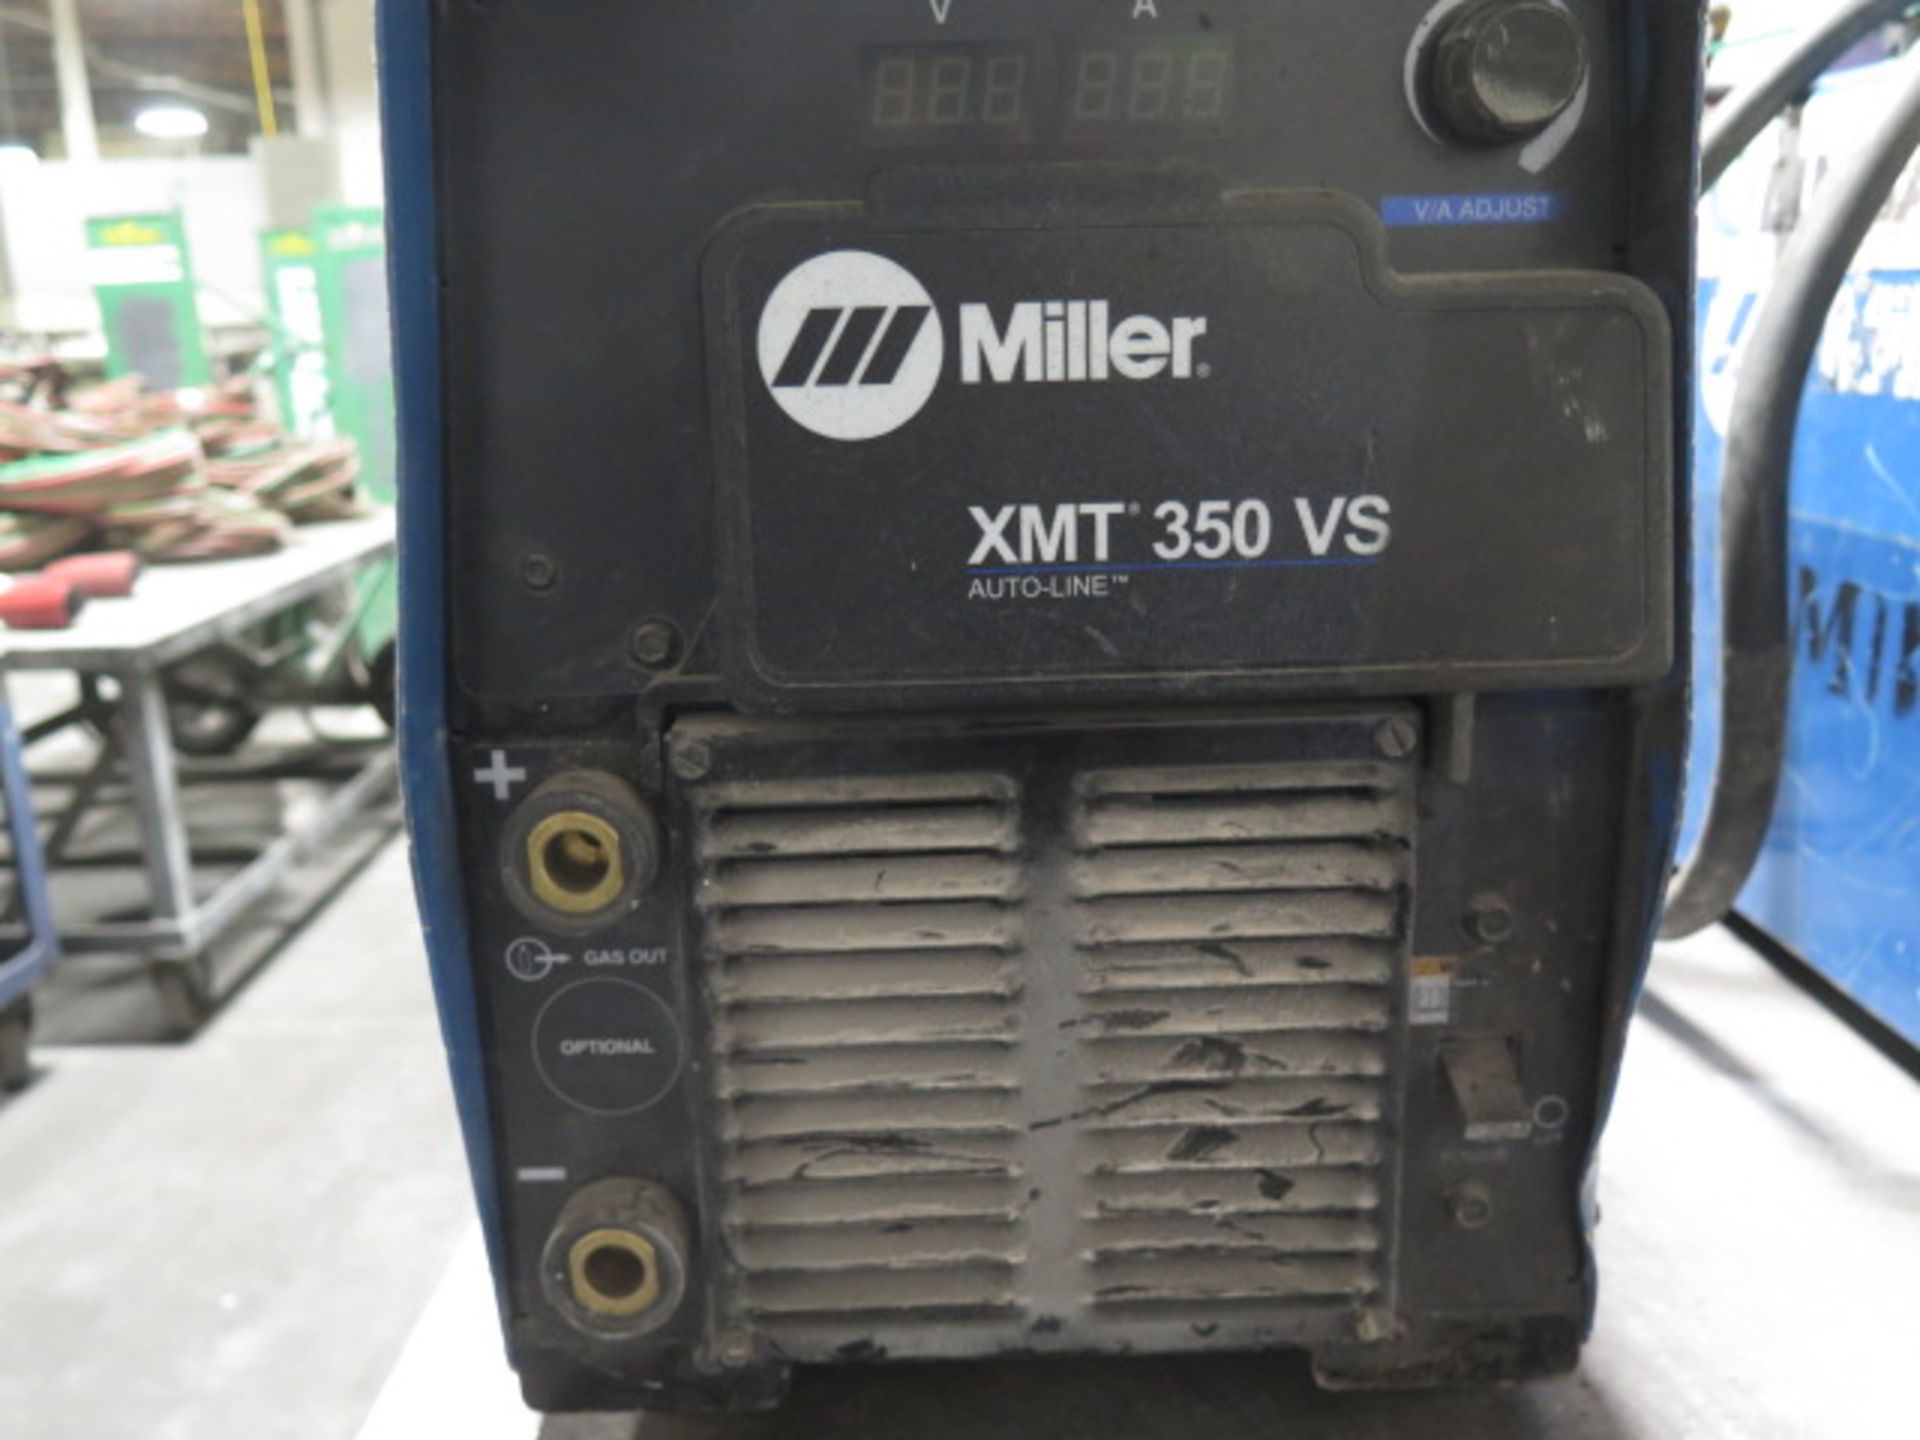 Miller XMT 350 VS Auto-Line Arc welding Power Source s/n MG024114U (SOLD AS-IS - NO WARRANTY) - Image 5 of 5